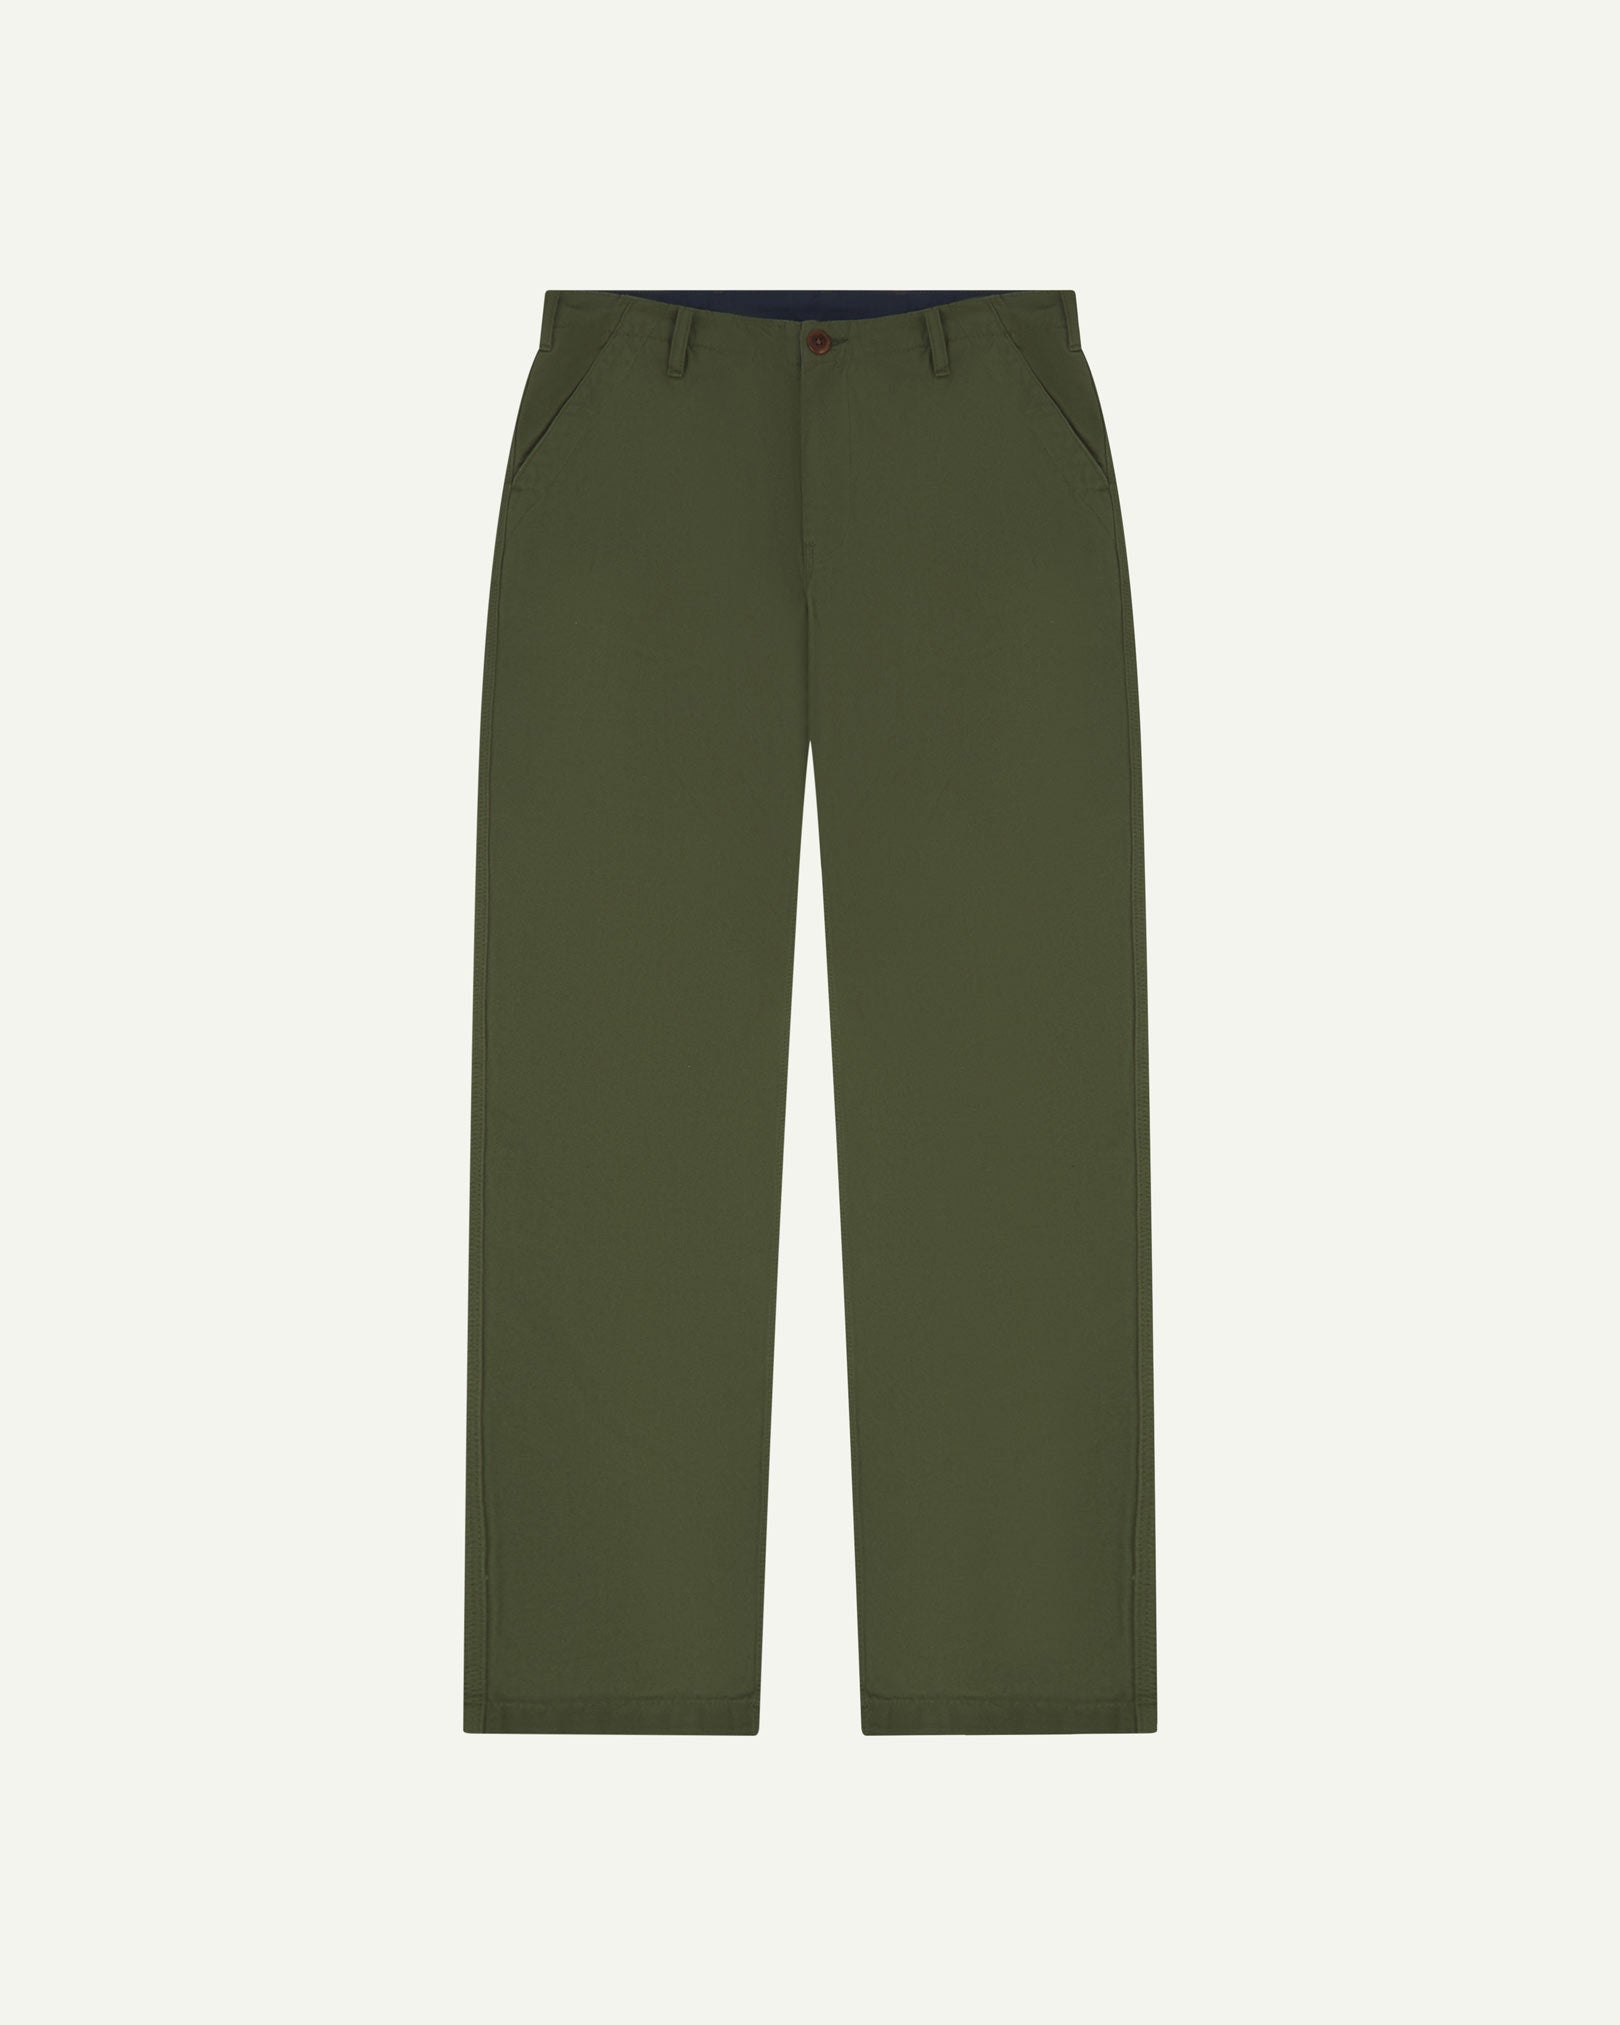 Front flat view of 5005 Uskees men's organic cotton coriander-green casual trousers with view of YKK zip fly and Corozo buttons.